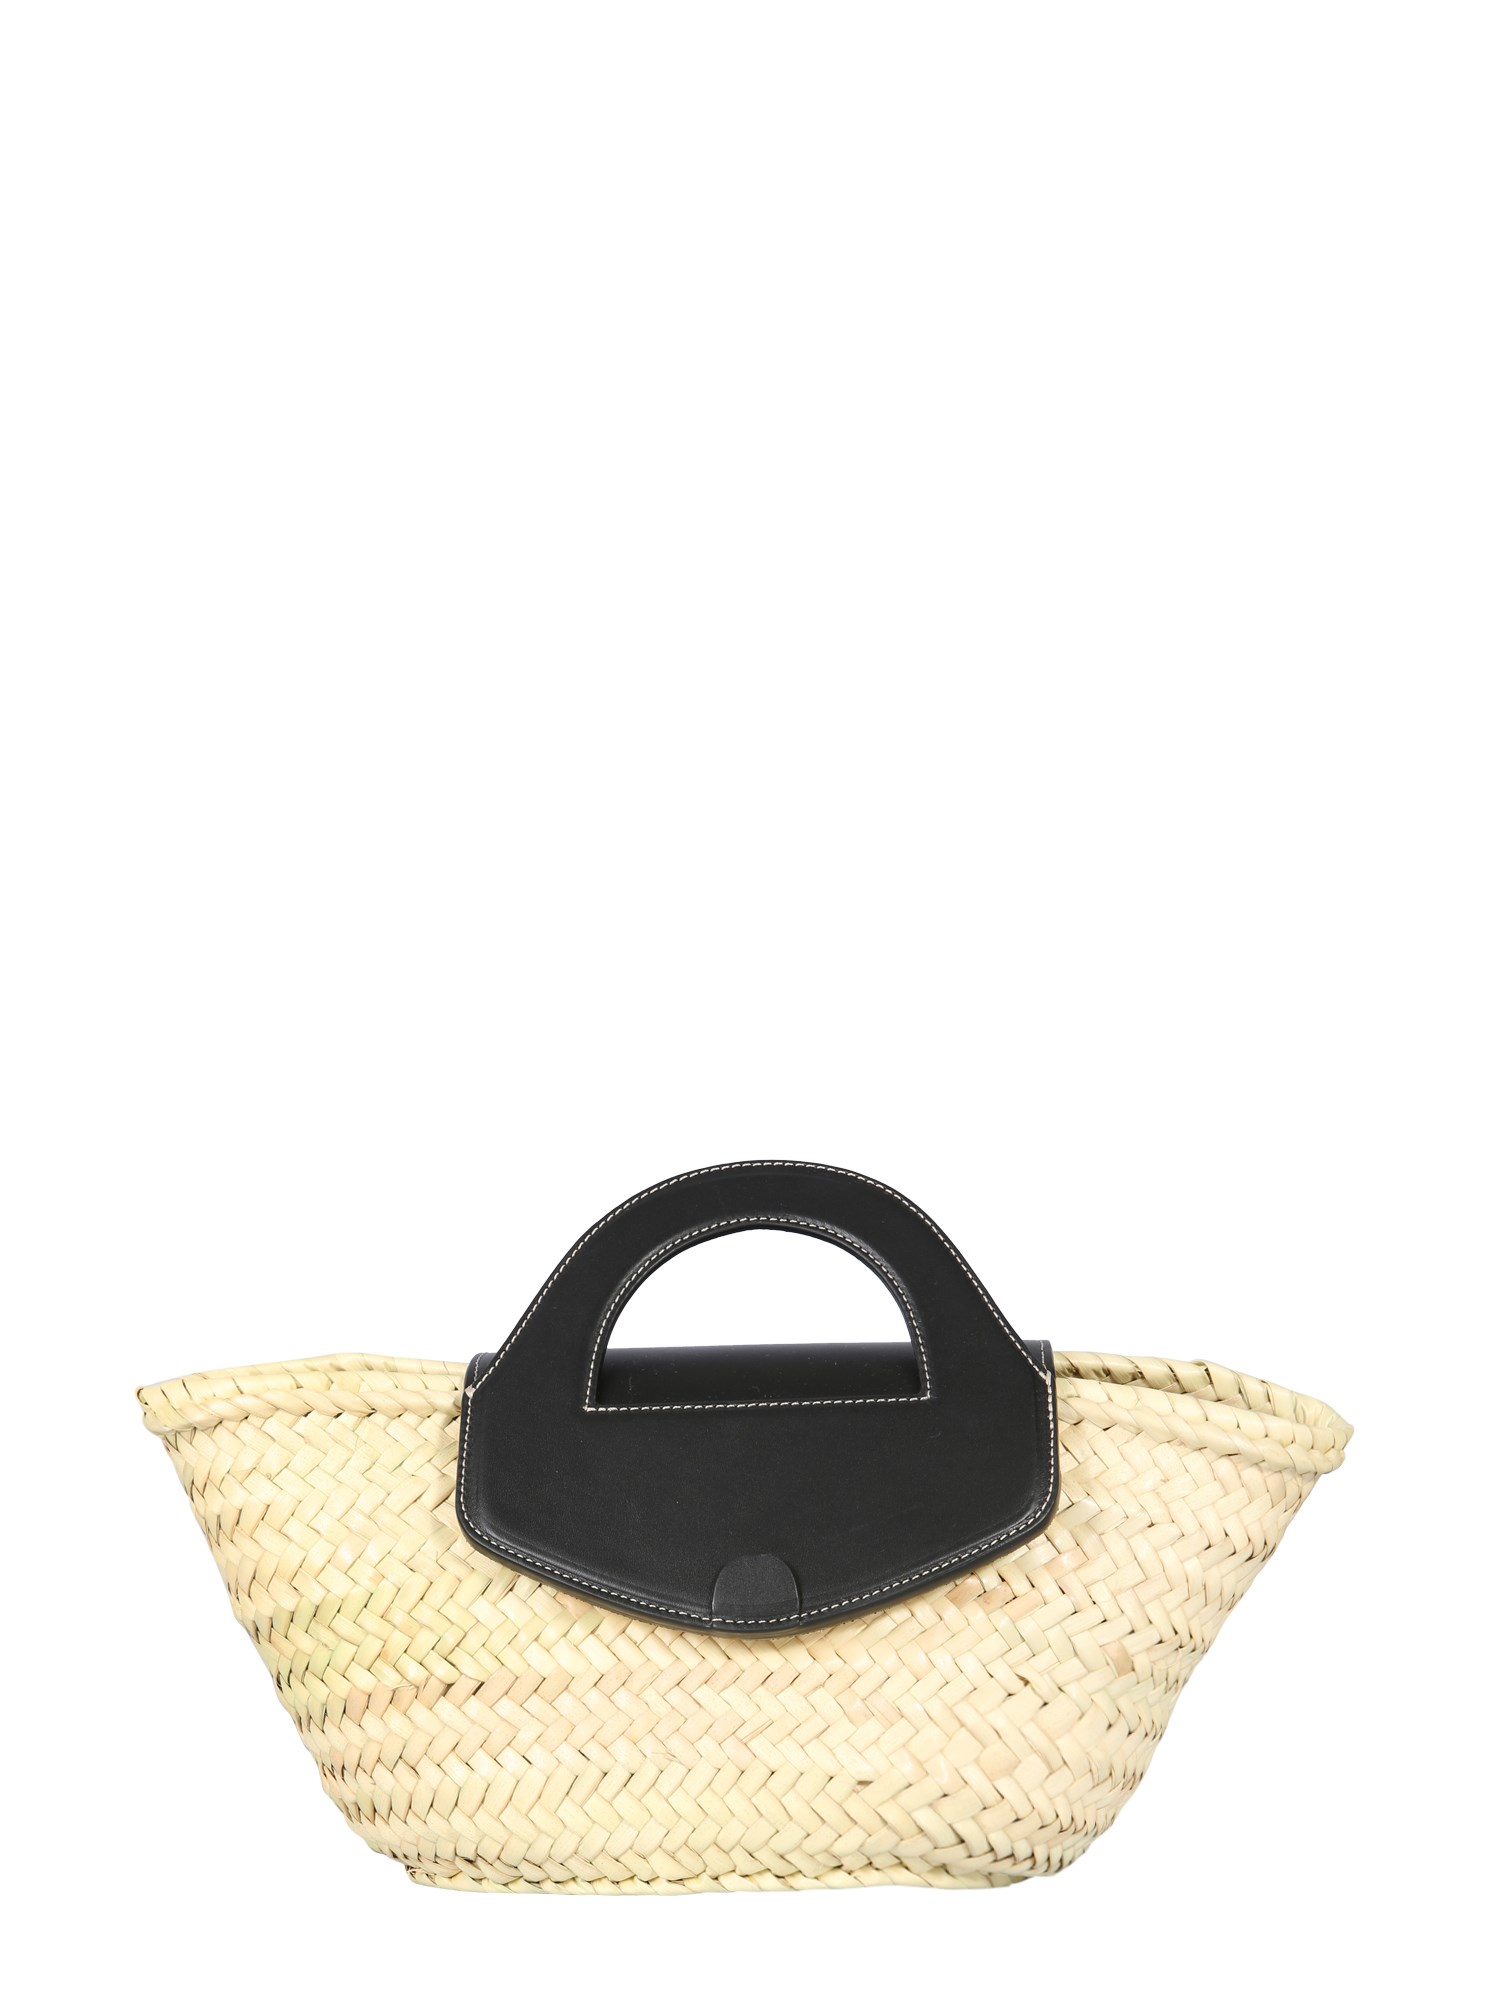 Black Coloma Interwoven Tote by Hereu for $20